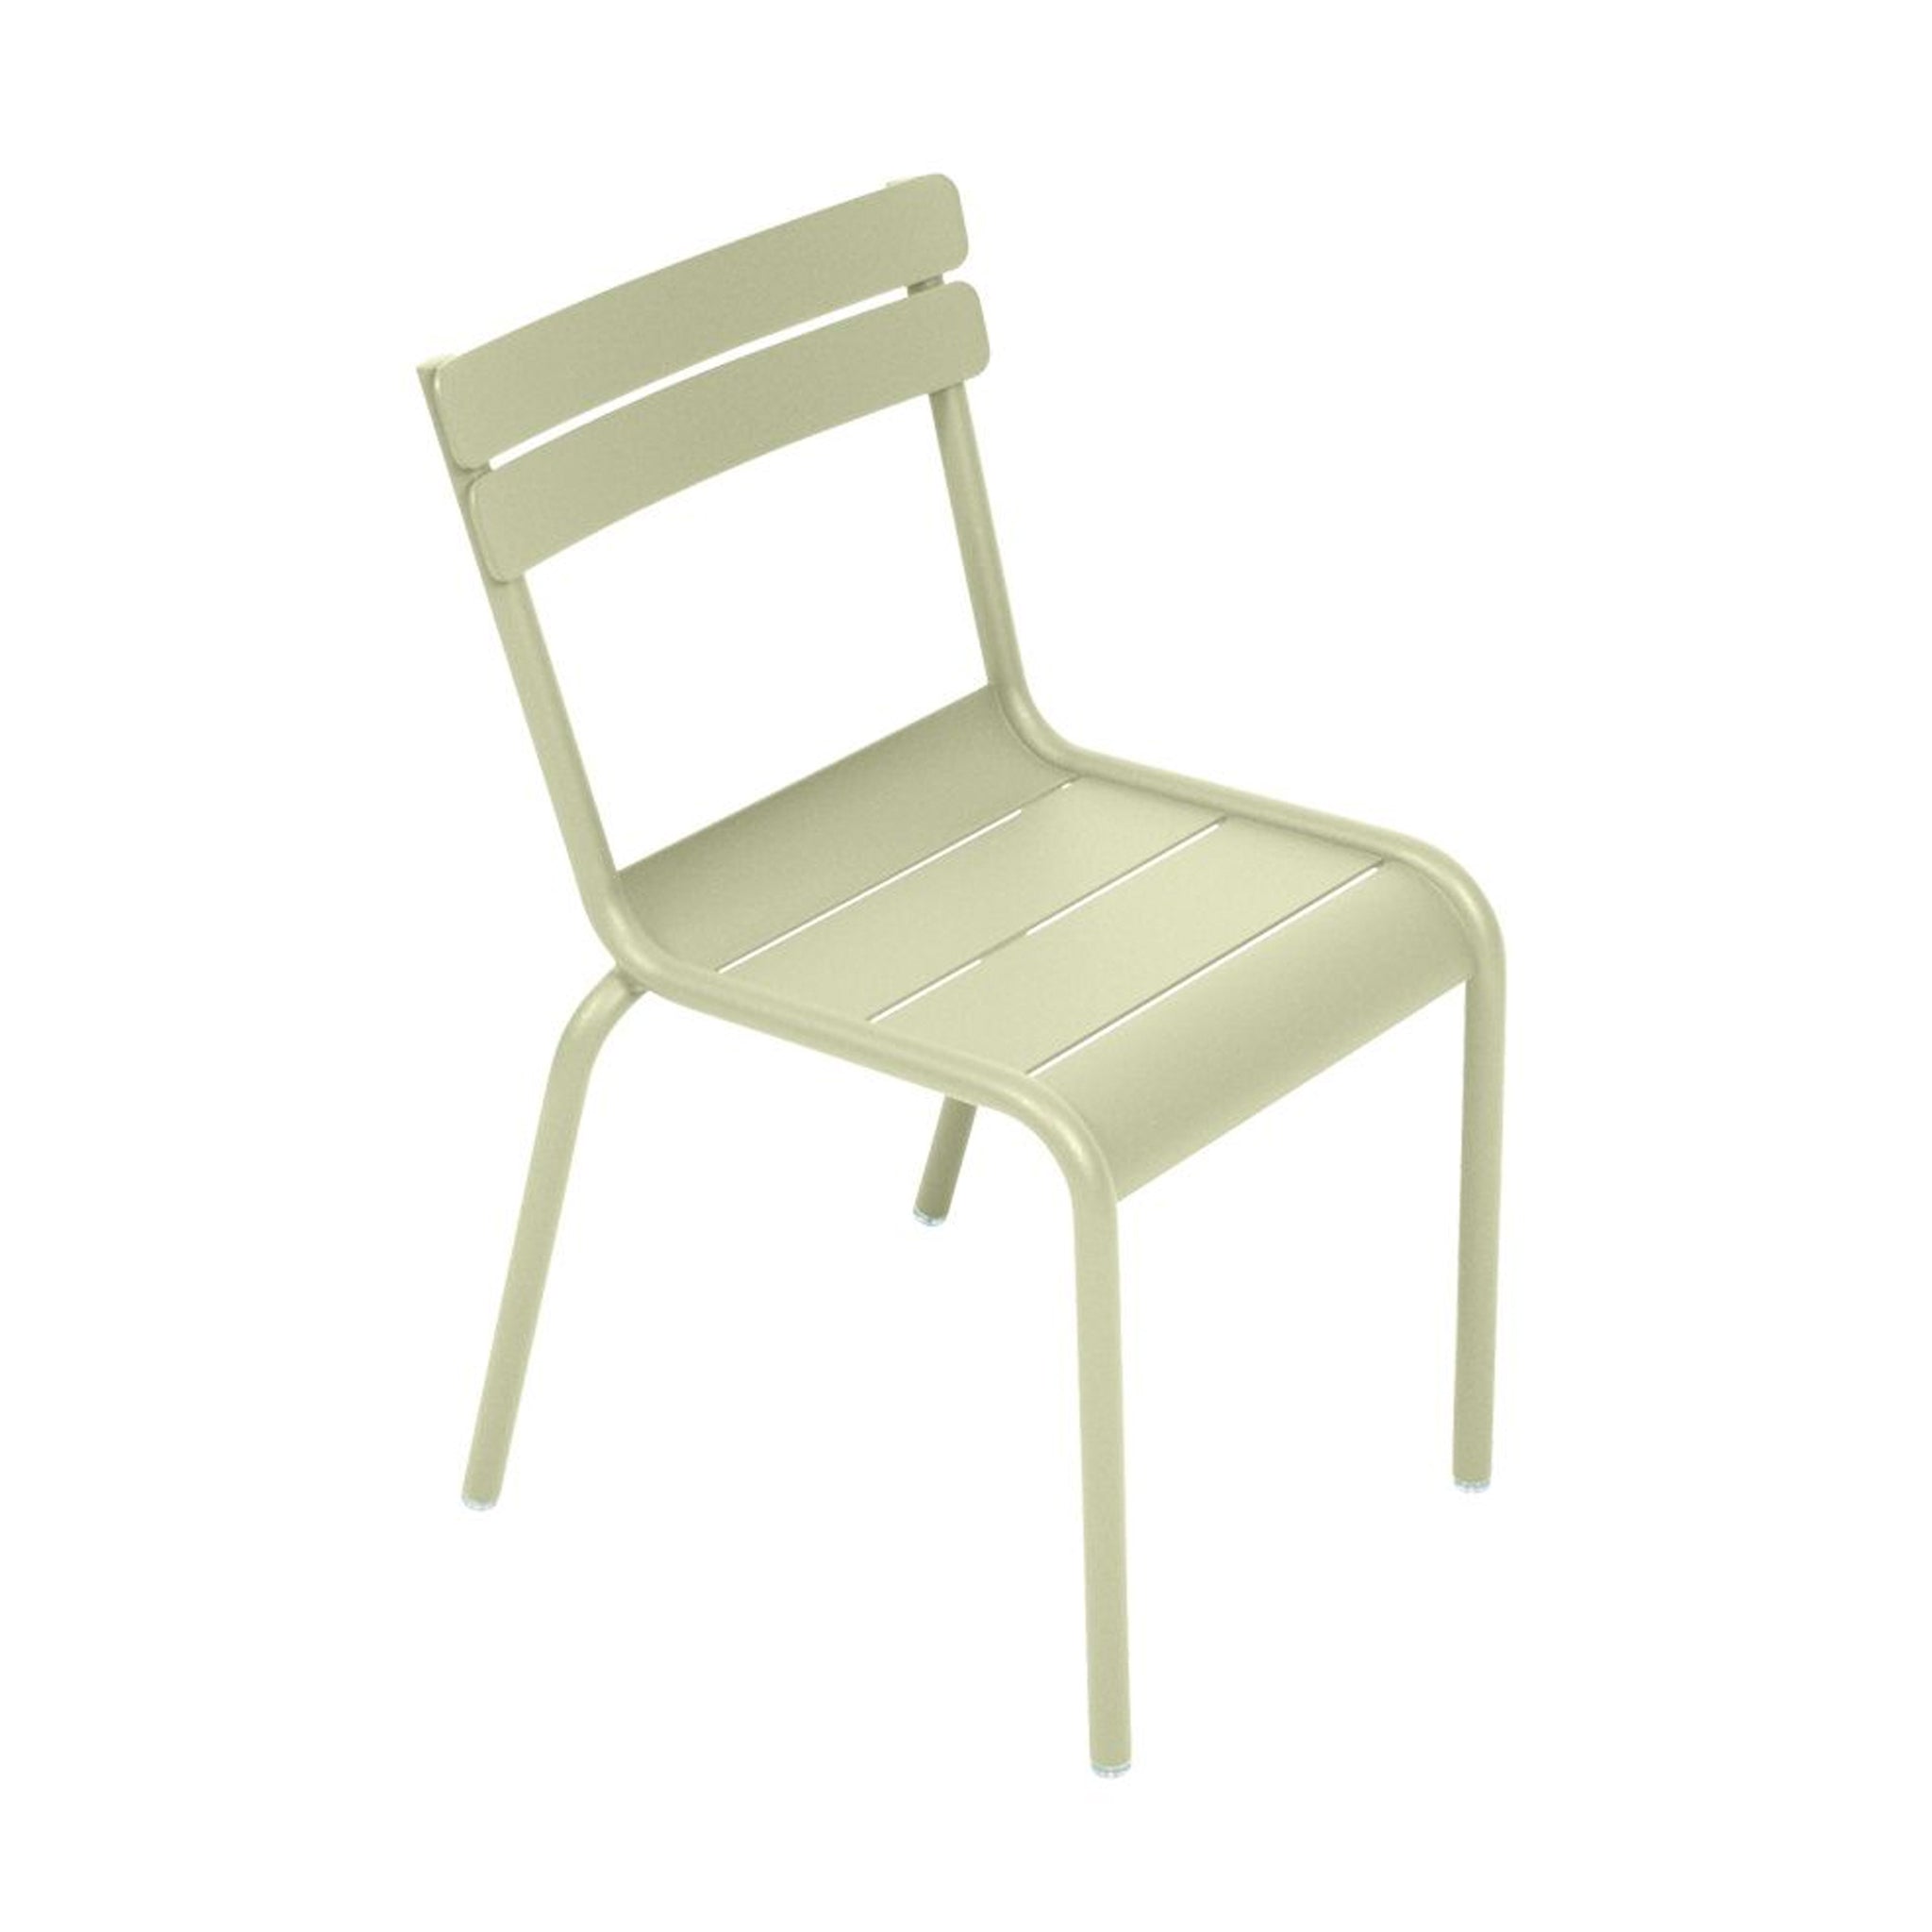 Luxembourg Kid's Chair by Fermob